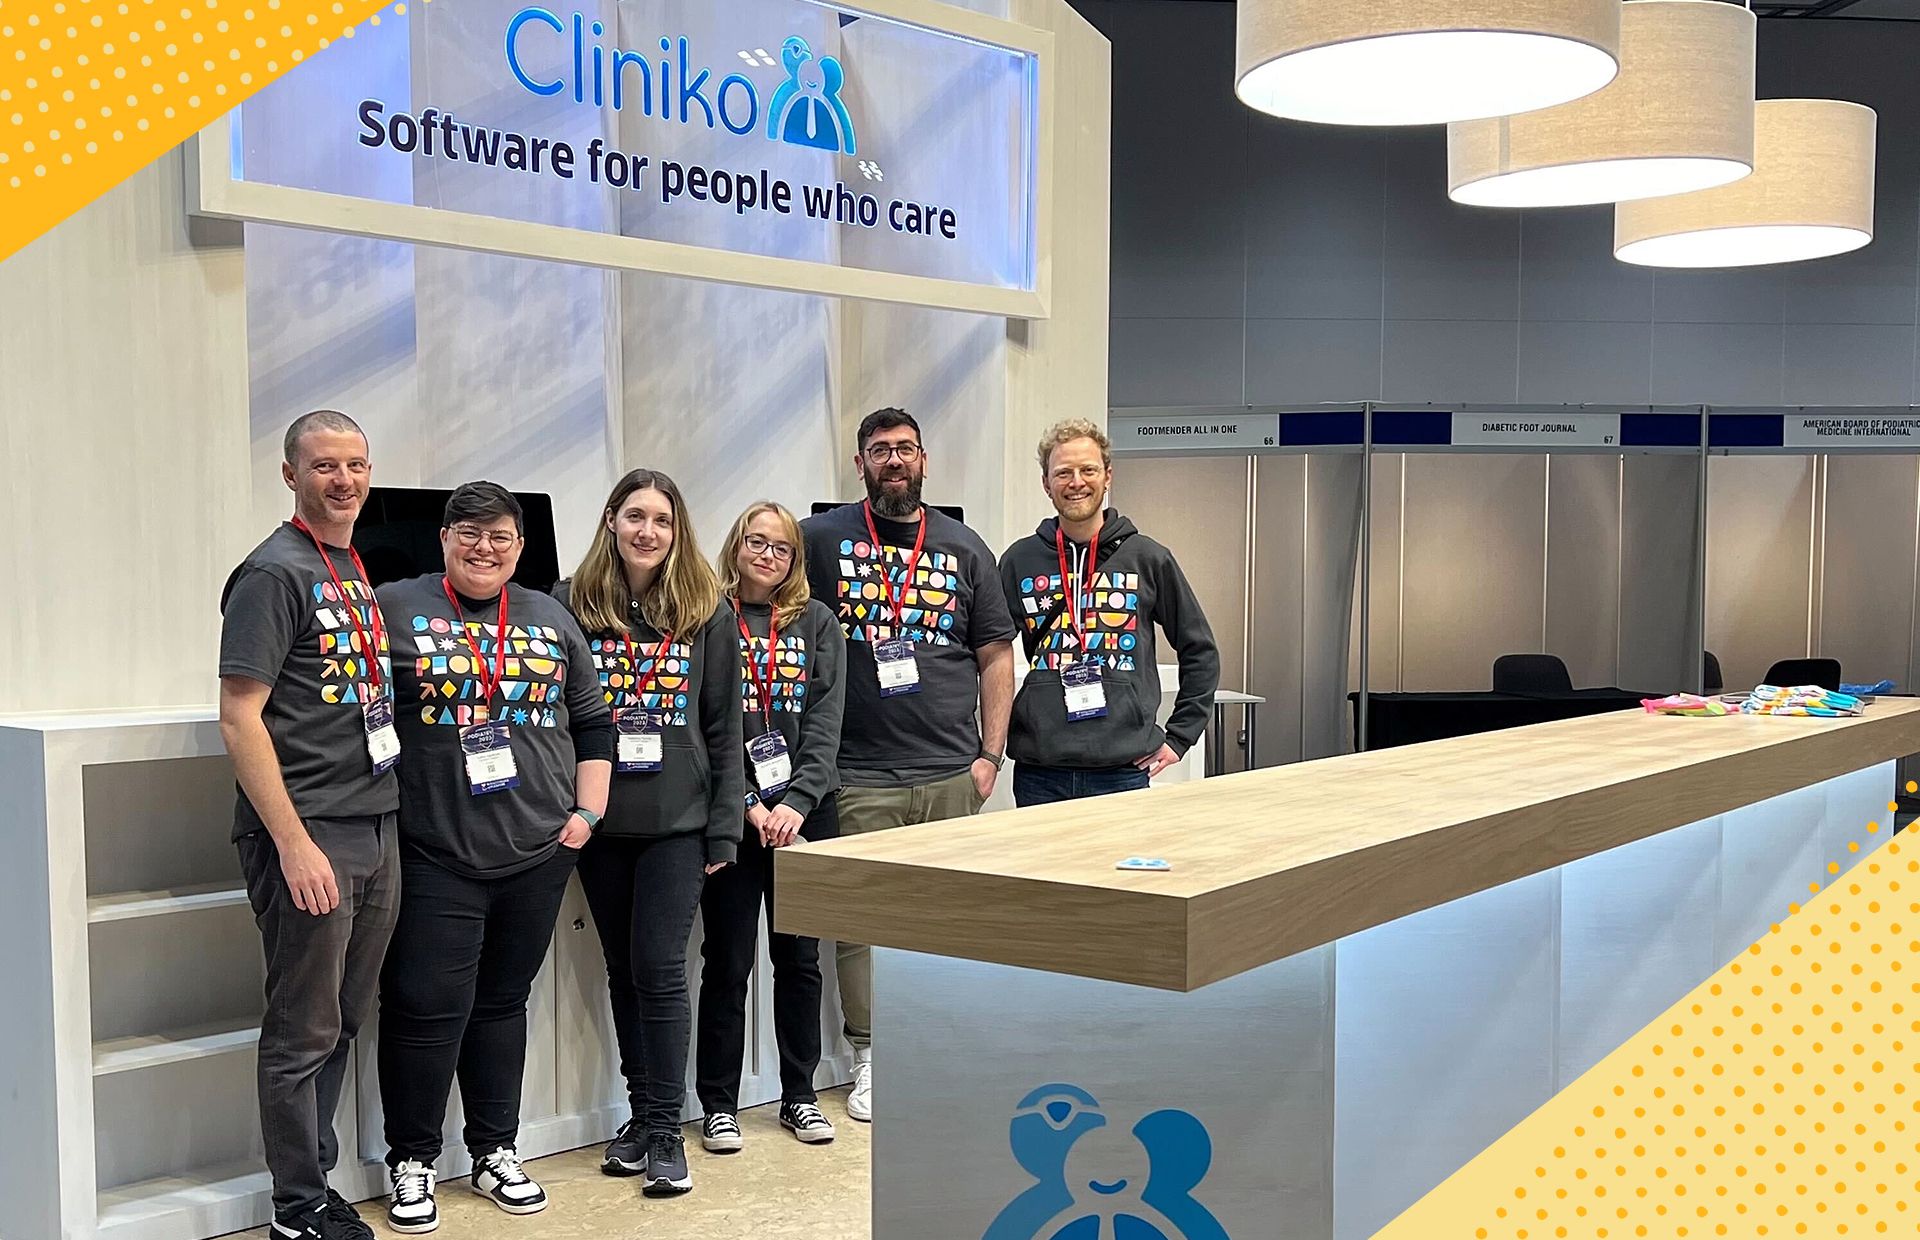 A photo of the team posing in front of the Cliniko stand at Podiatry 2023